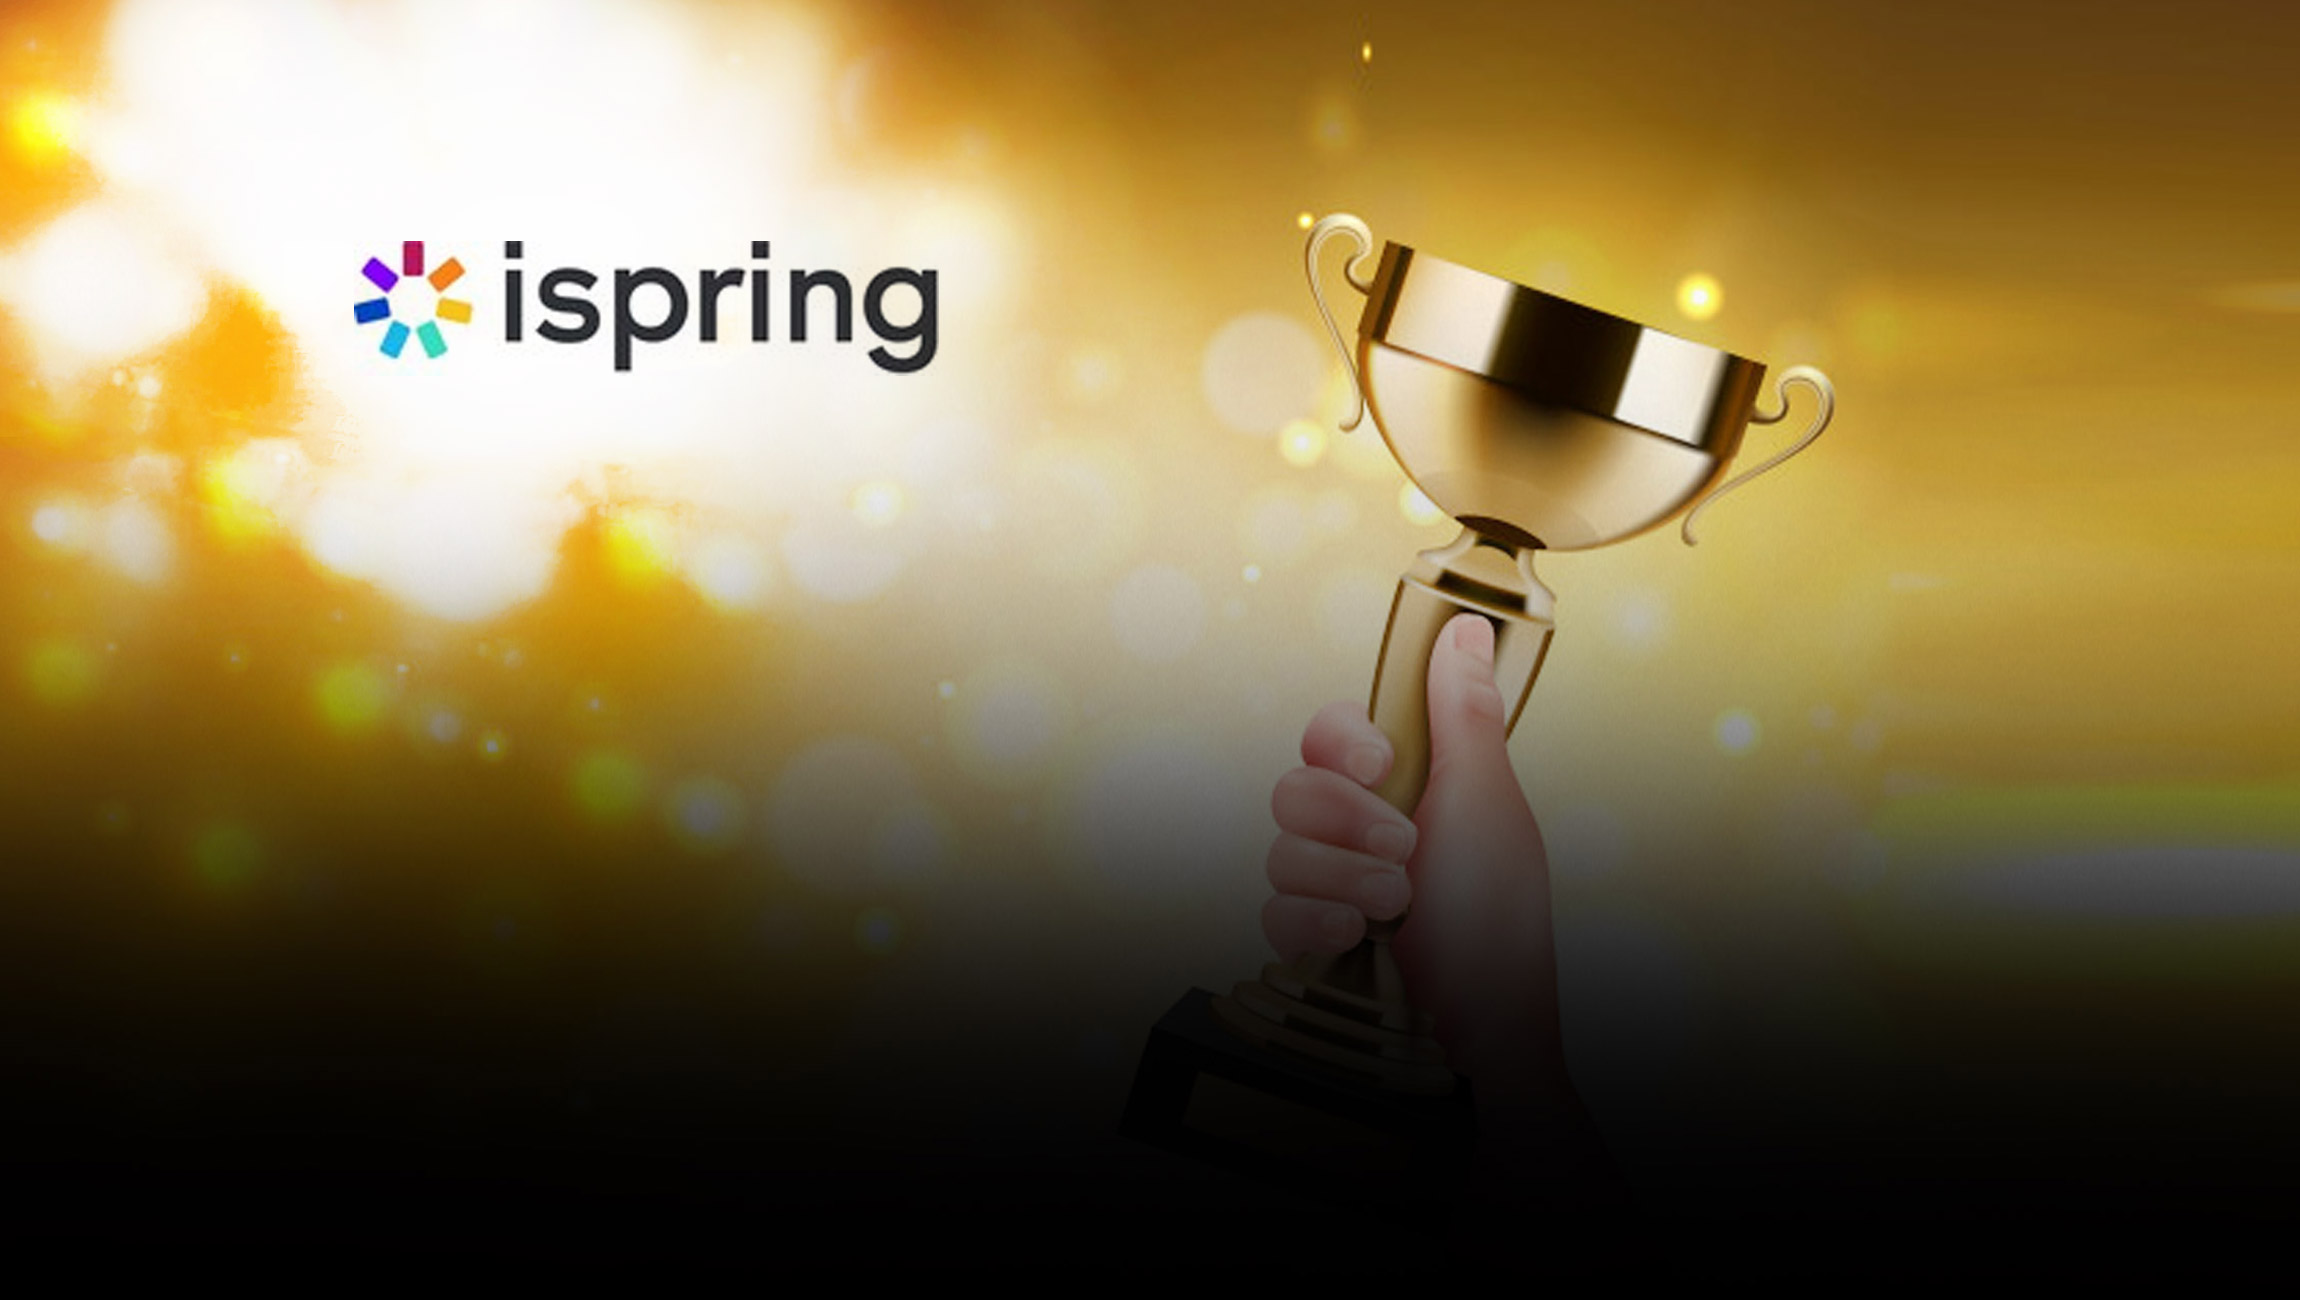 Oscar-for-Technical-Support-iSpring-Receives-Best-Company-Award-for-Customer-Service